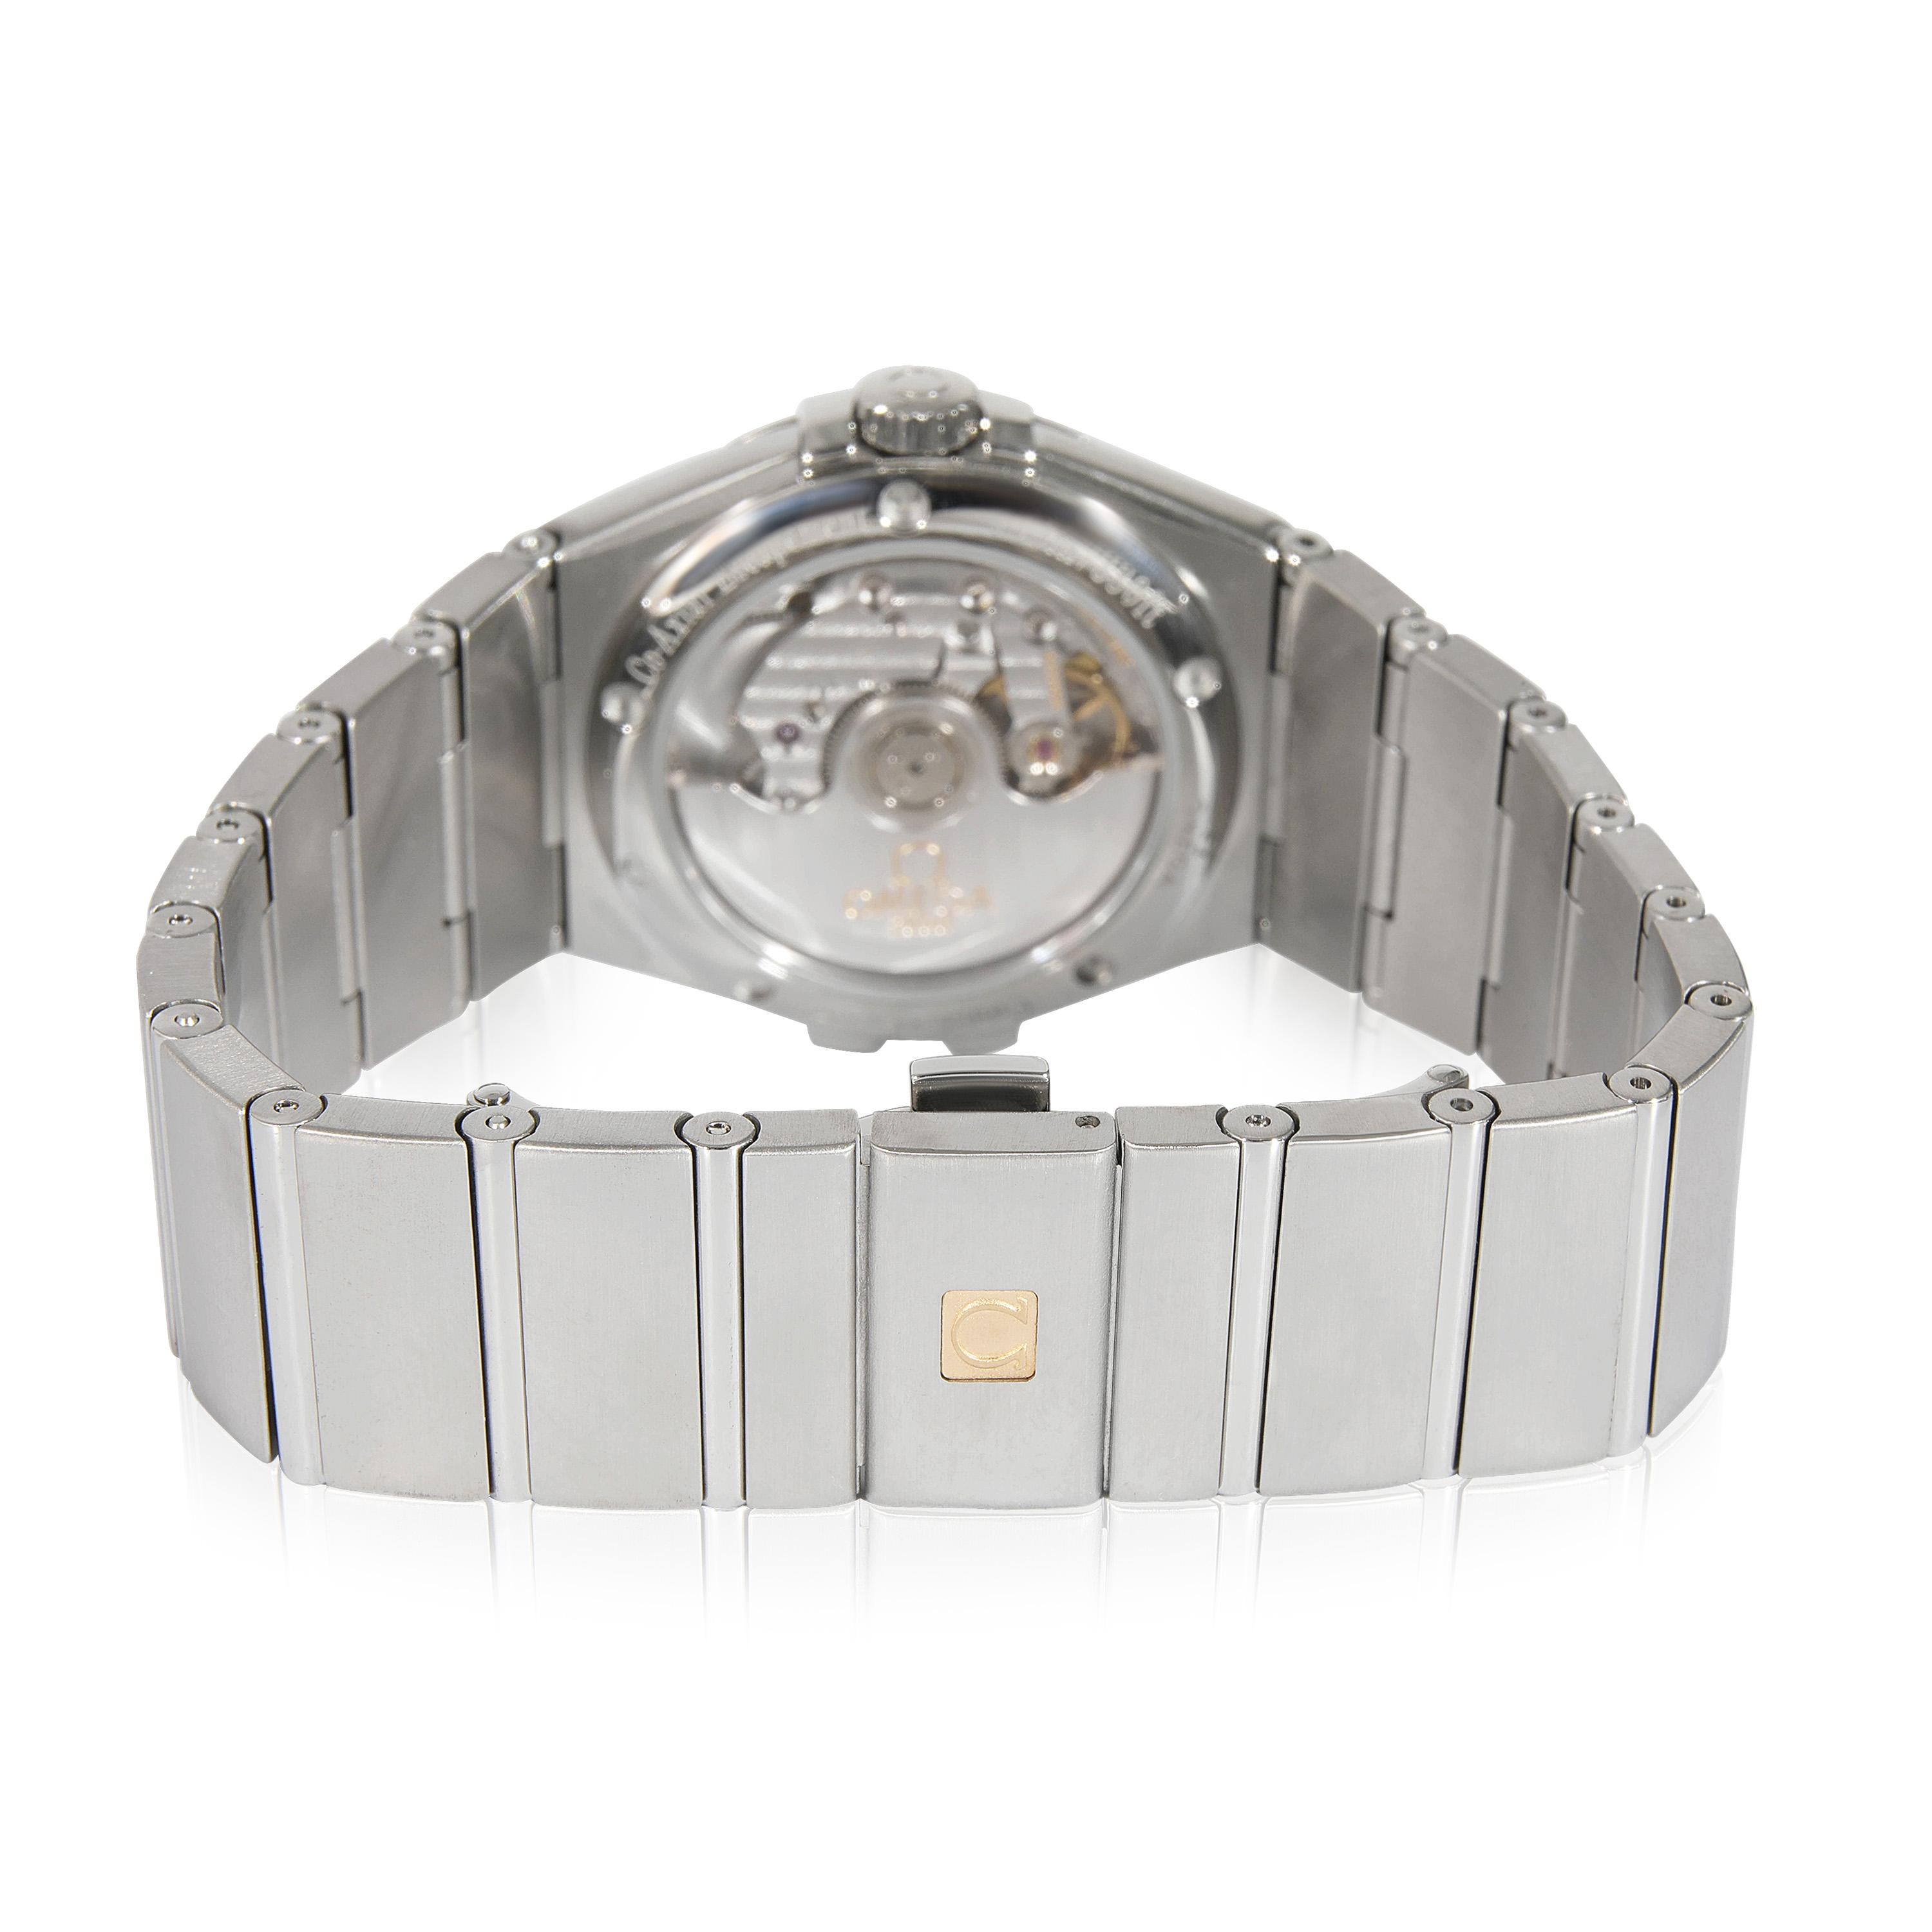 Omega Constellation 123.10.35.20.02.001 Unisex Watch in  Stainless Steel For Sale 1